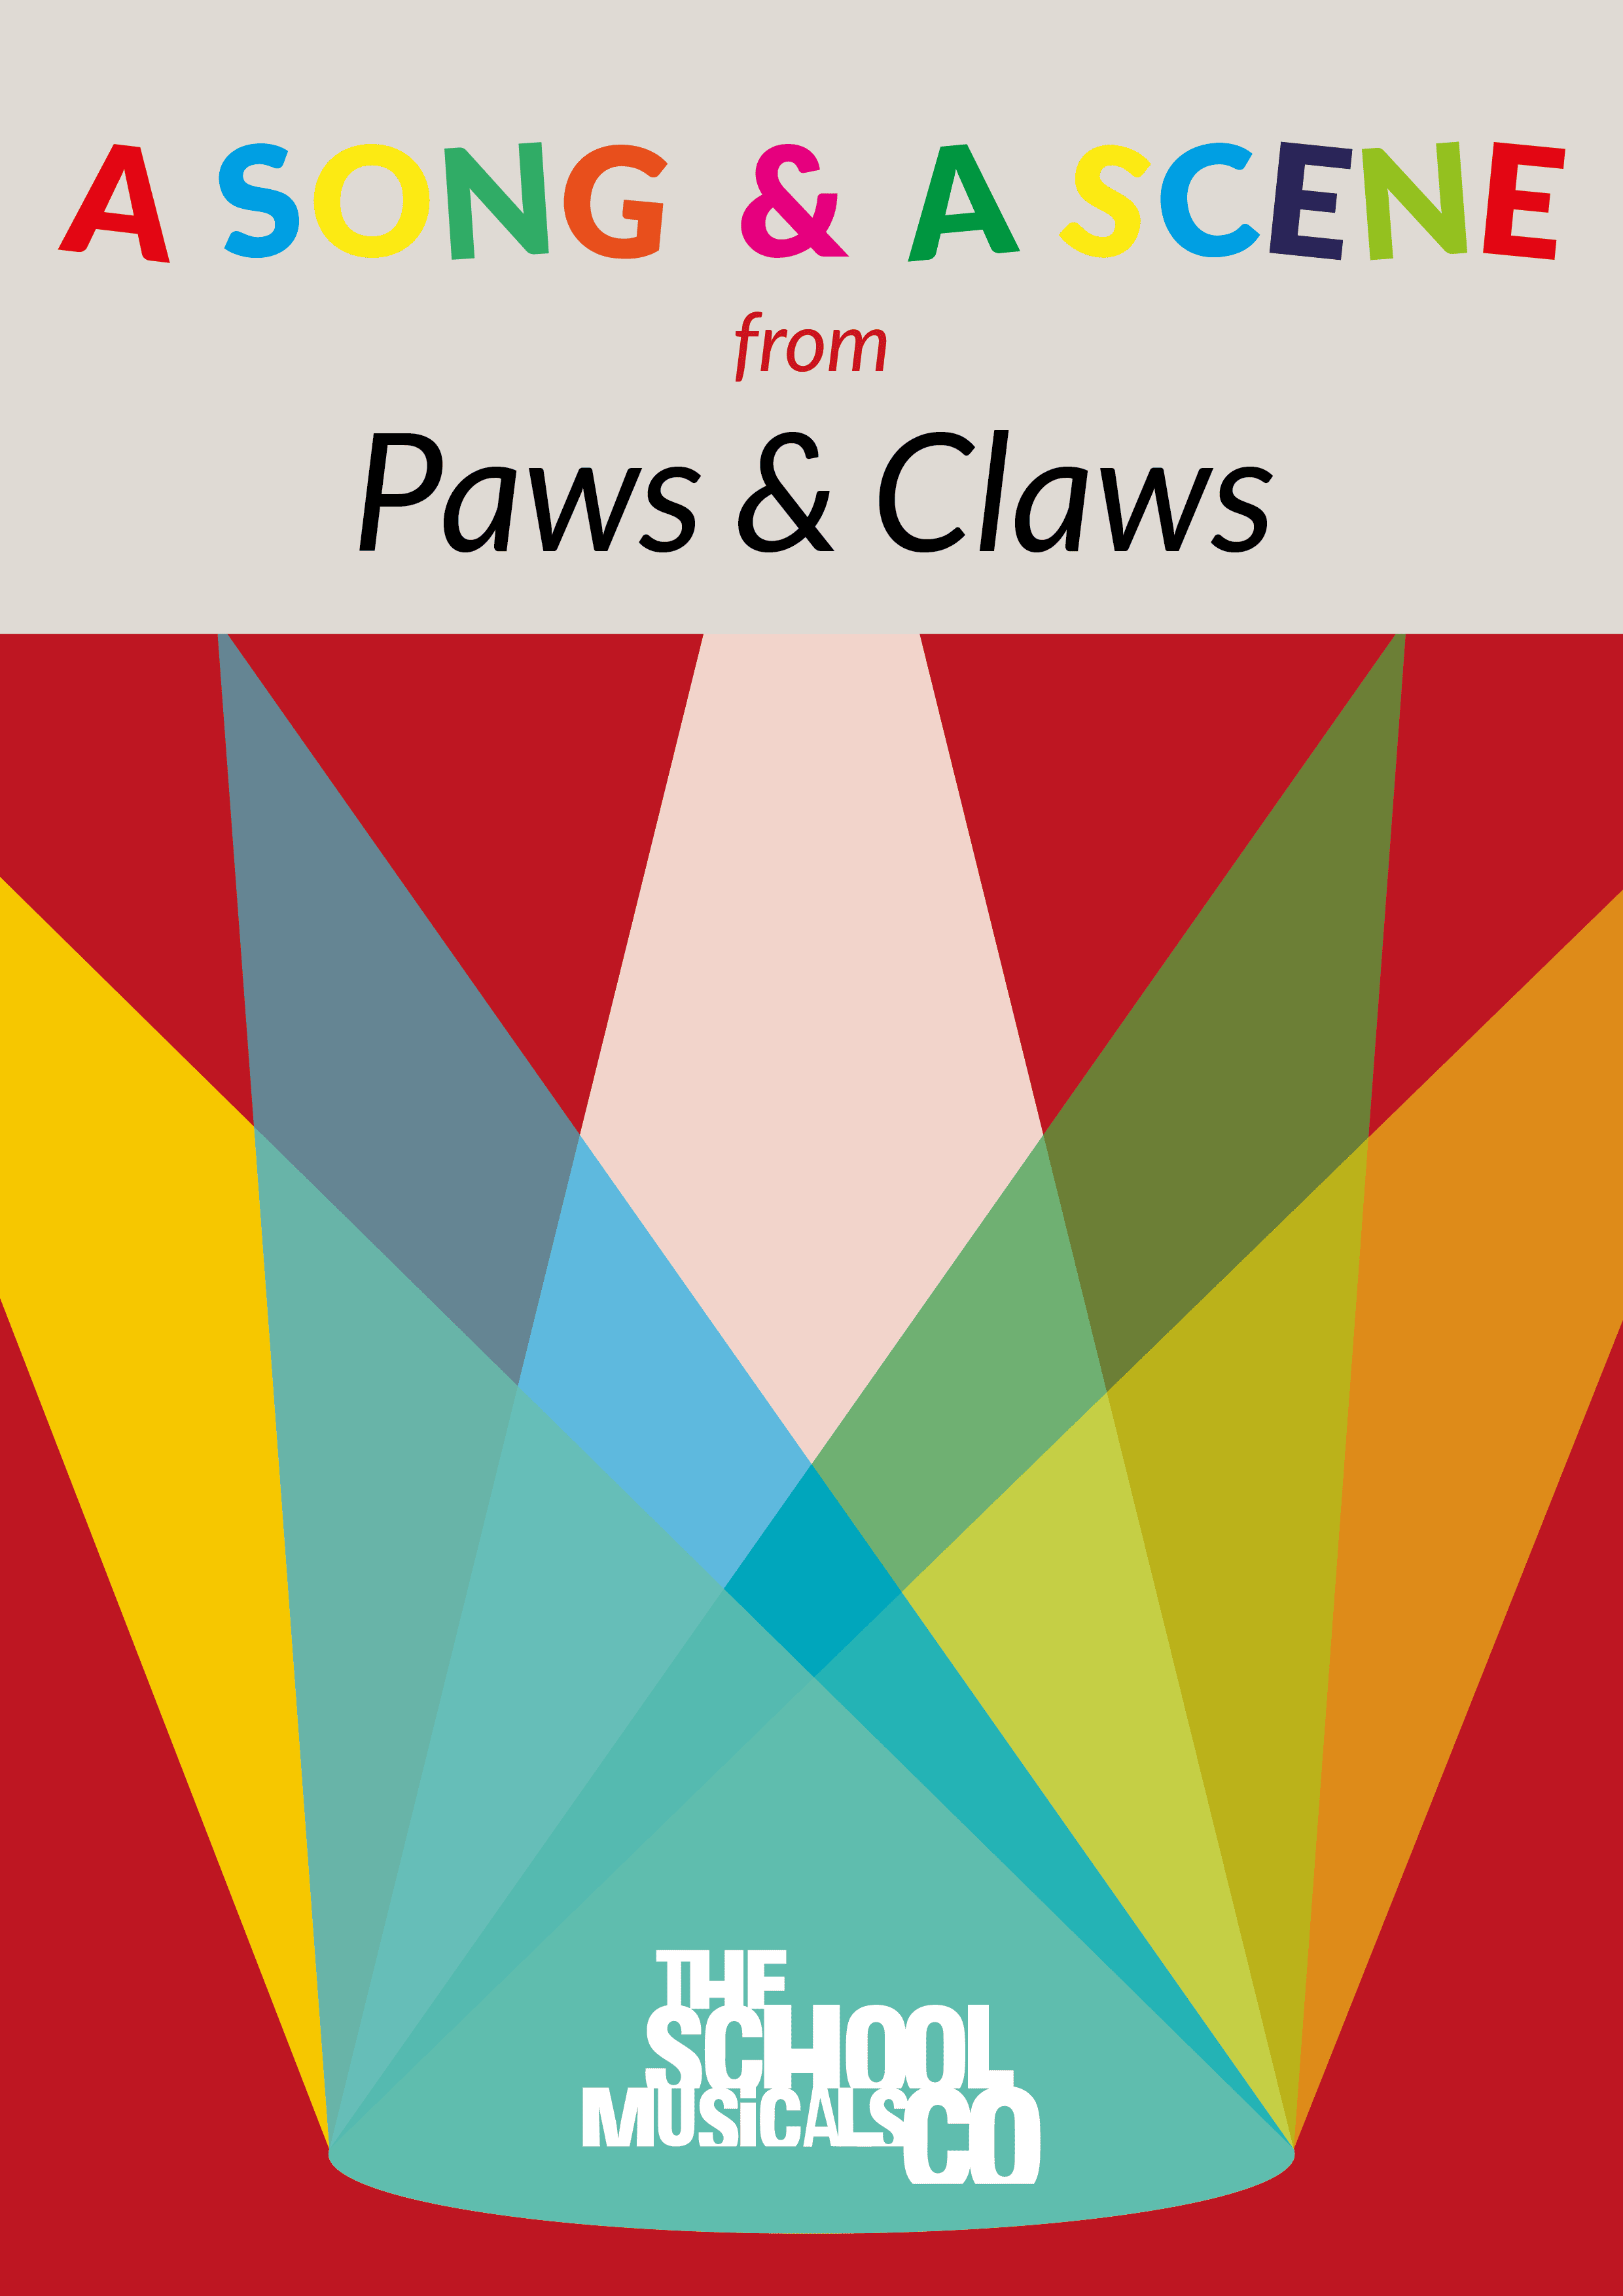 A Song & A Scene from Paws & Claws